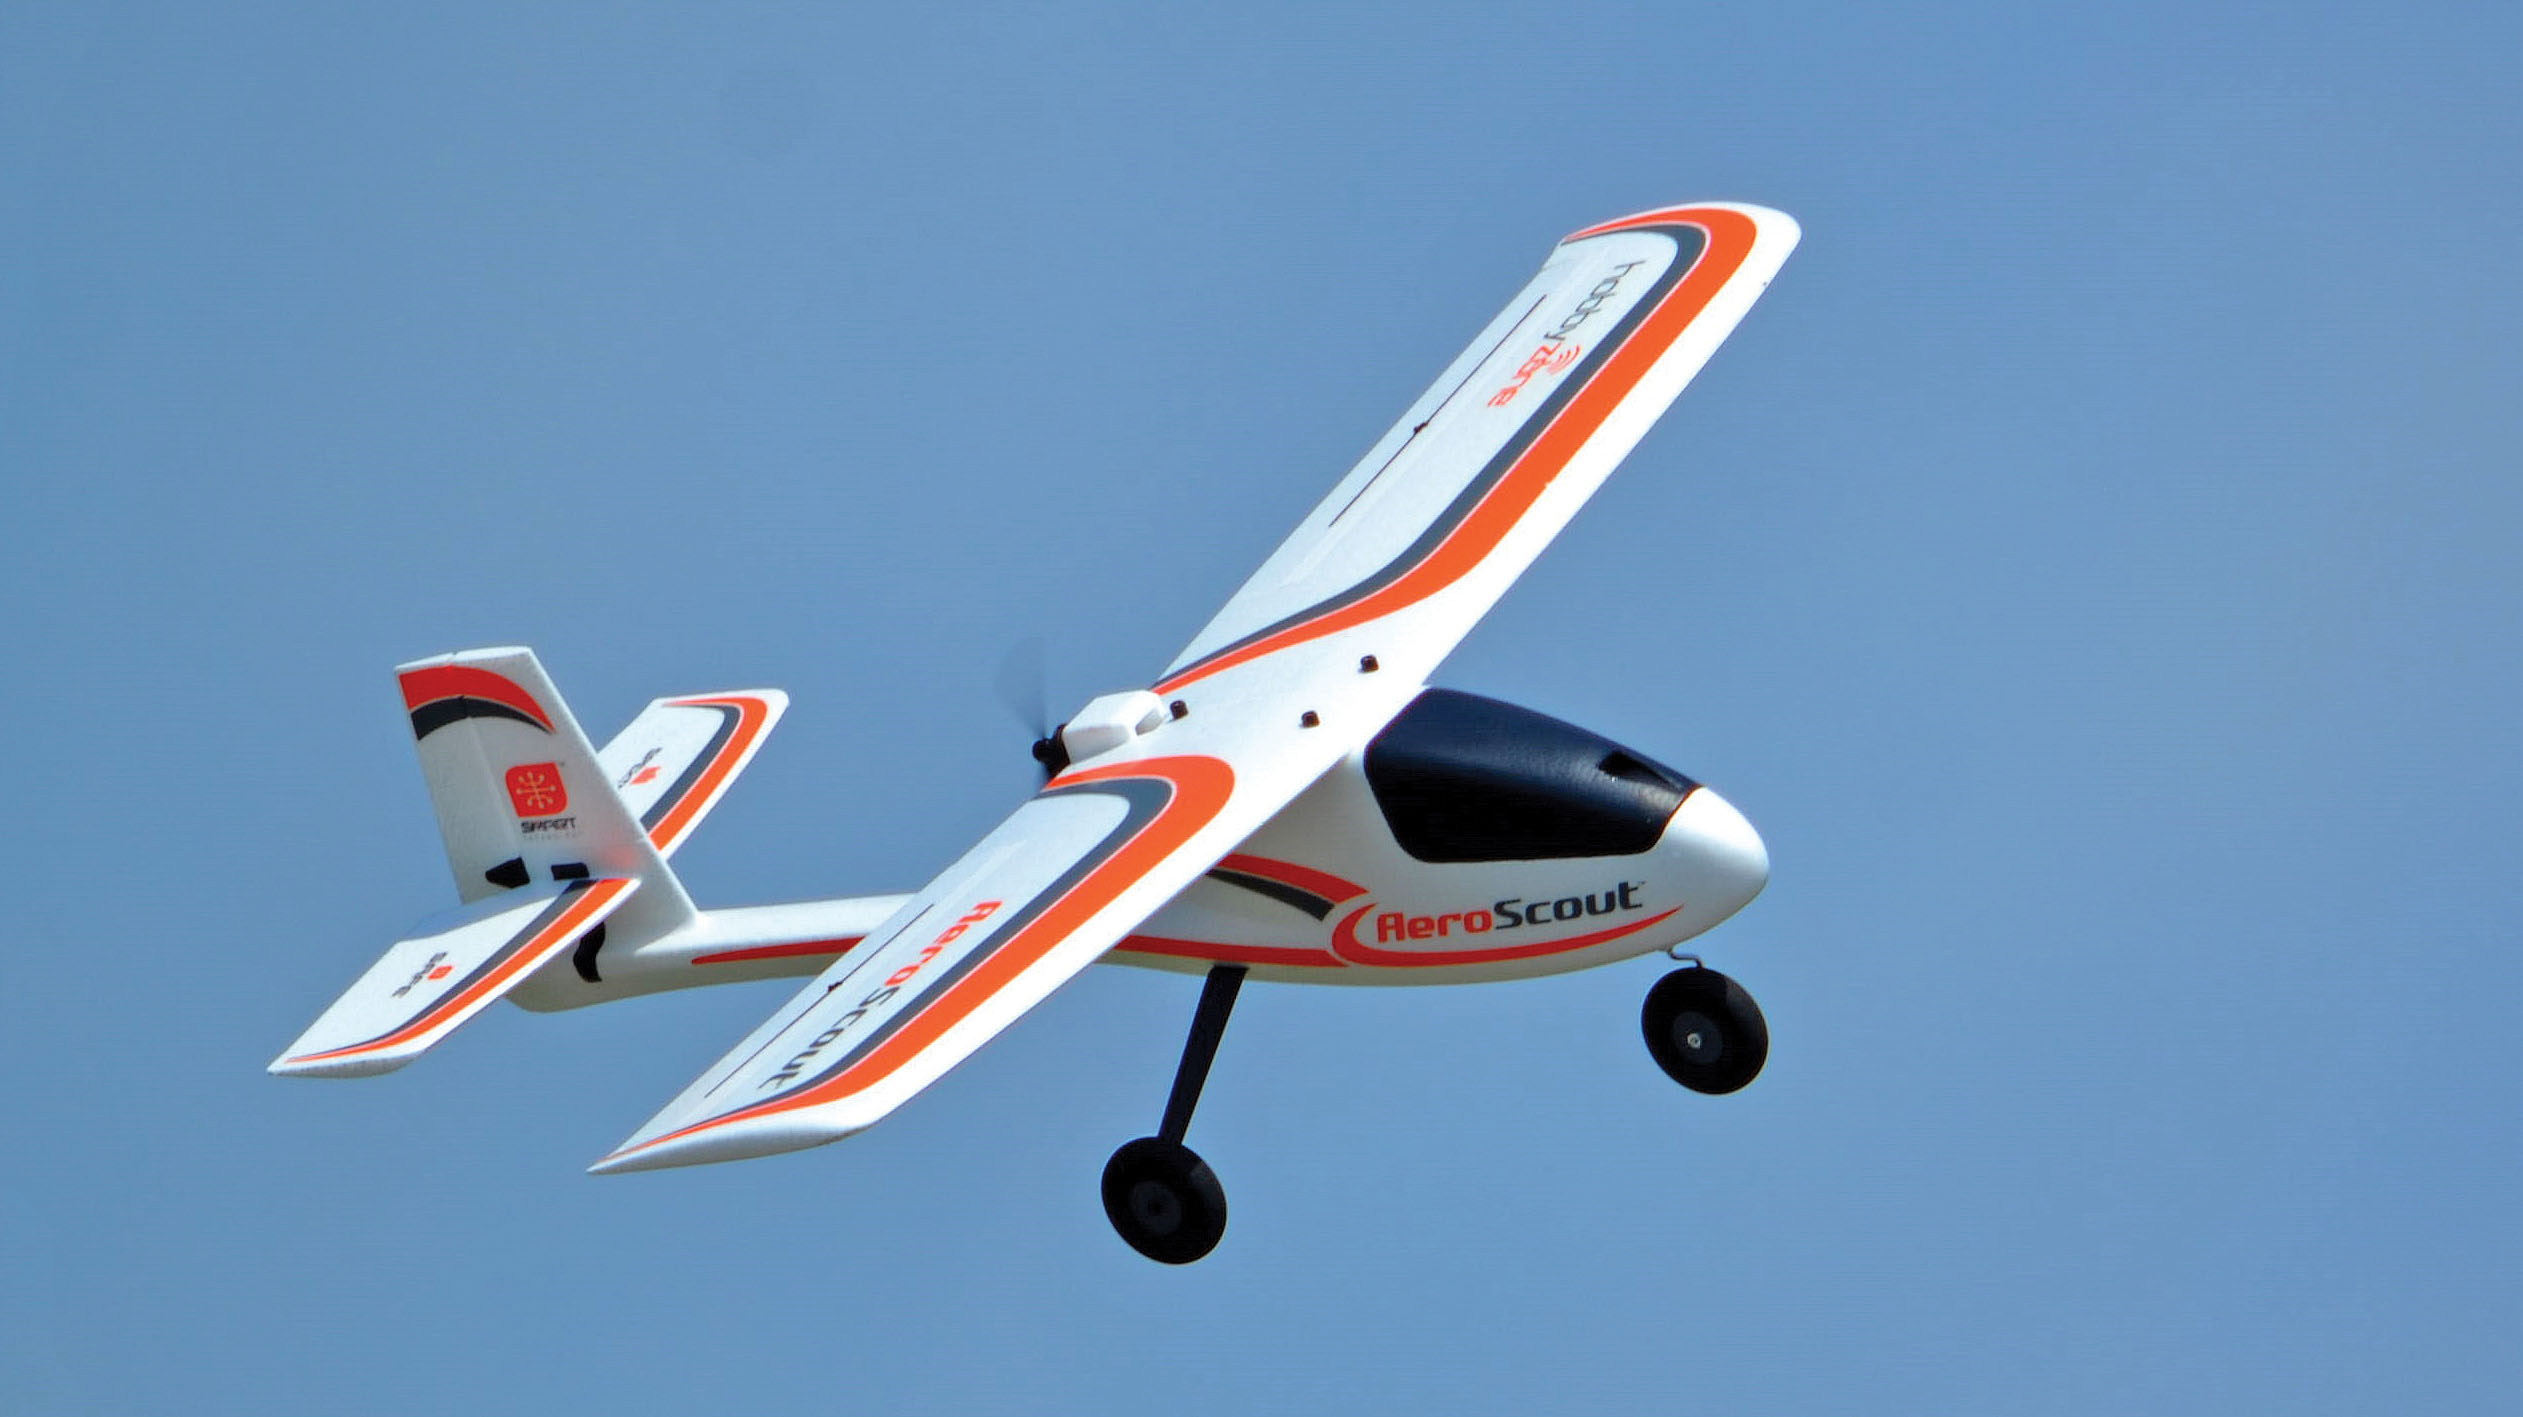 the aeroscout